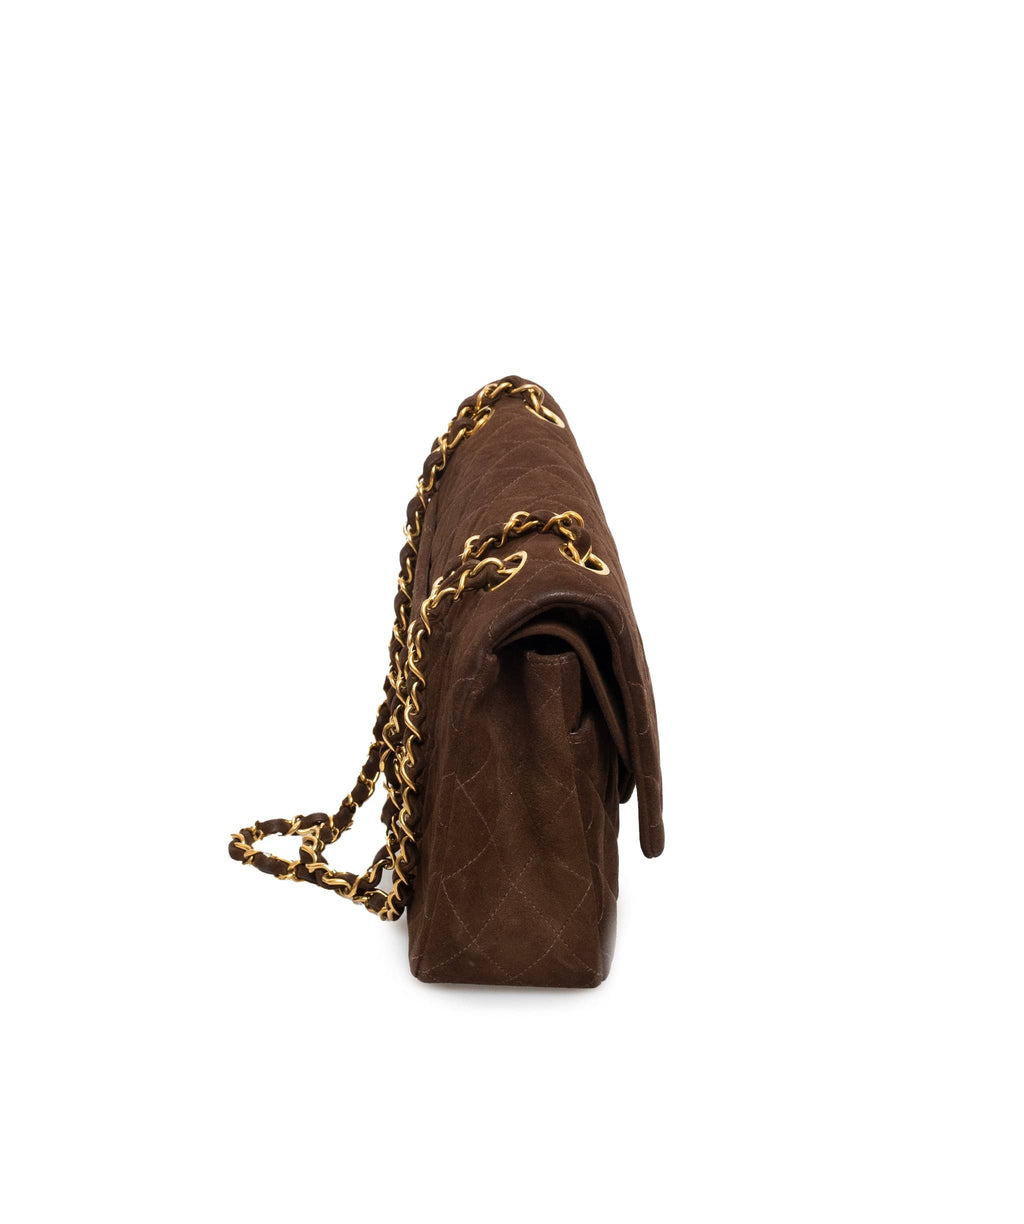 Sorbonne flap bag in suede and vintage leather